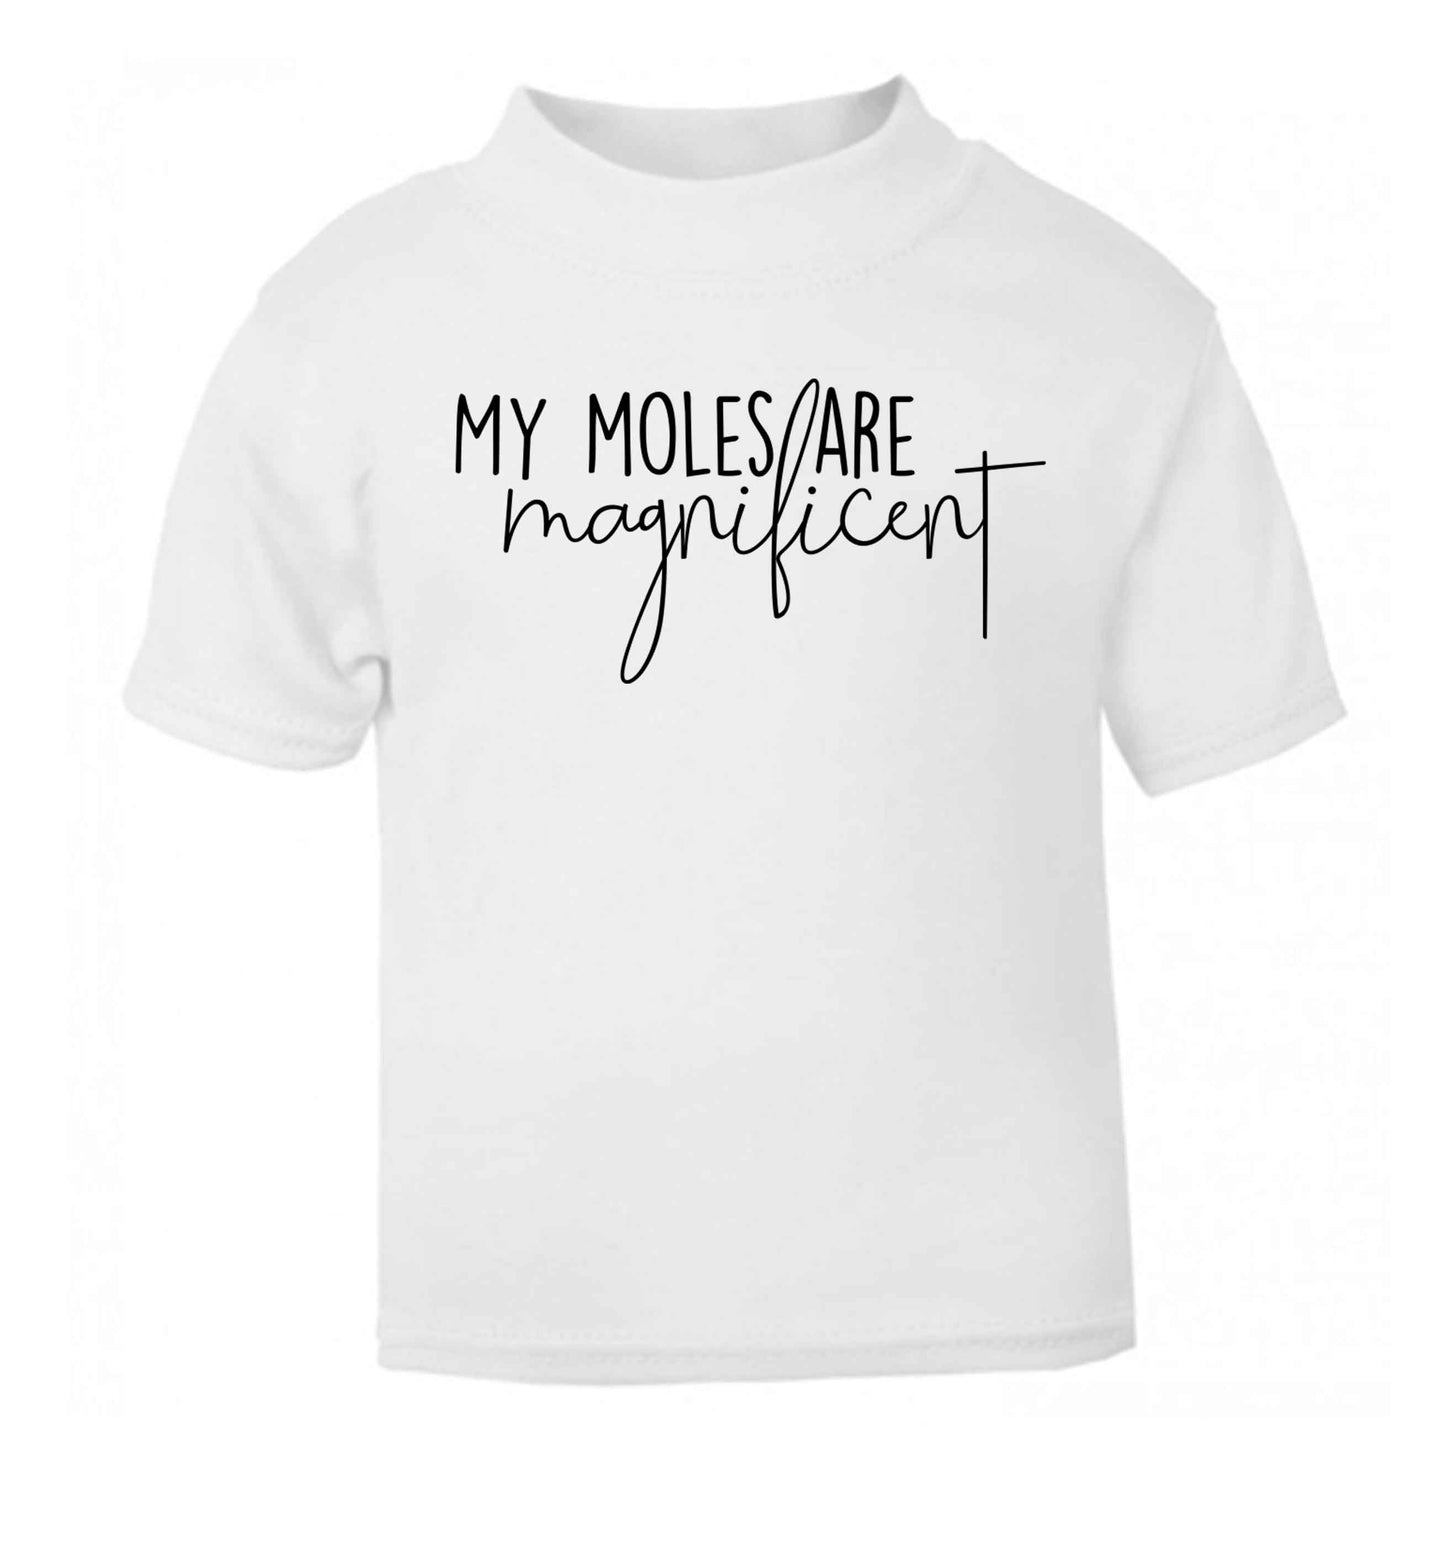 My moles are magnificent white baby toddler Tshirt 2 Years